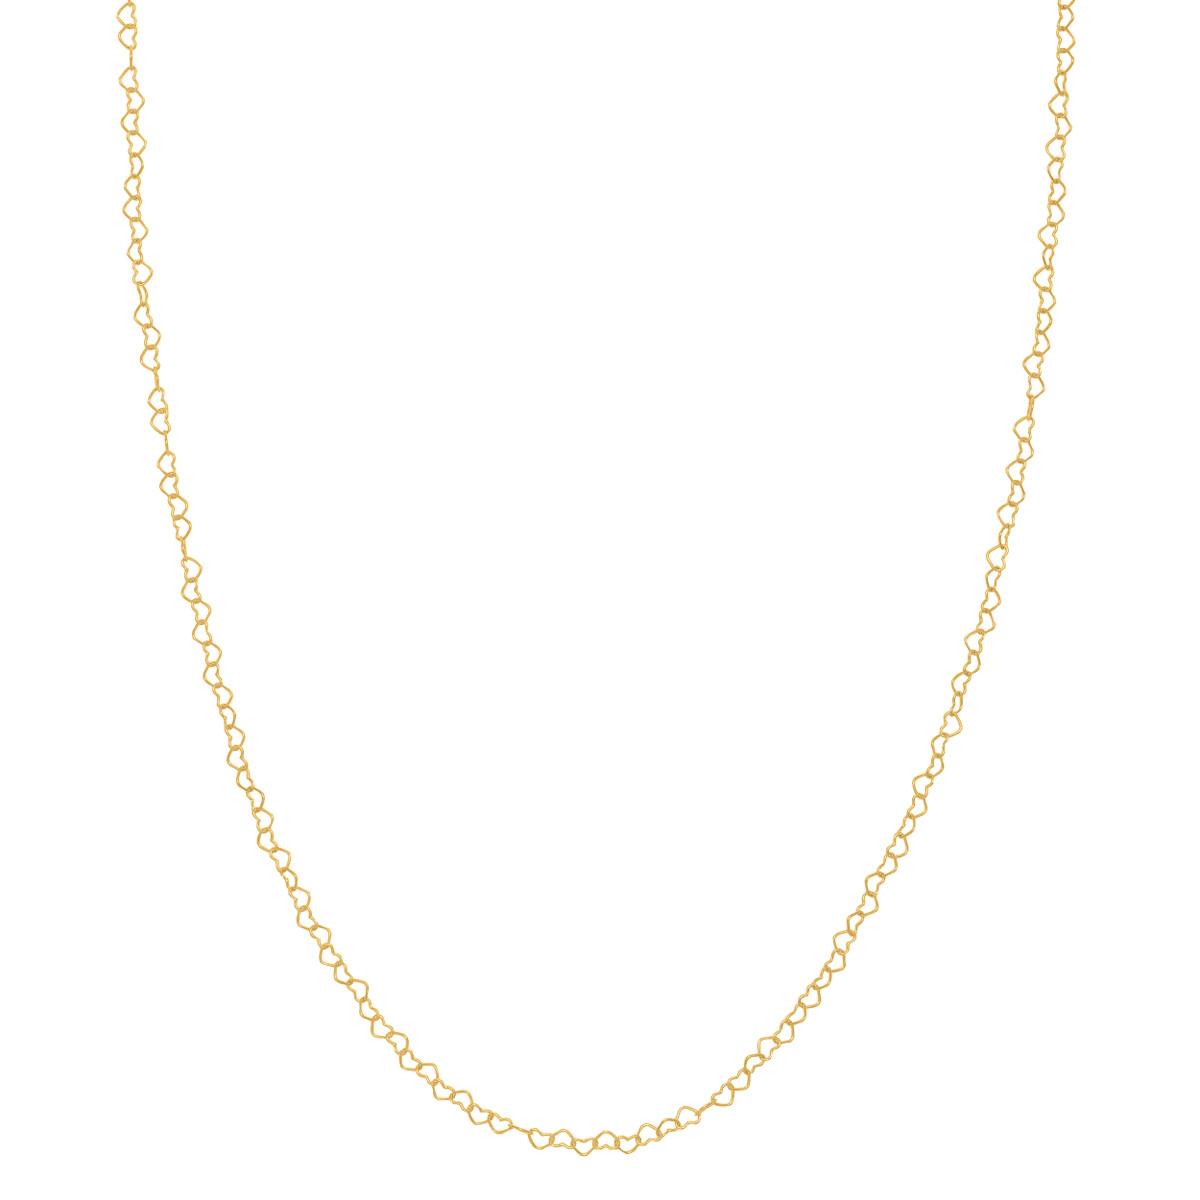 Hyde Park 14KT Yellow Gold Love Heart Chain Necklace-26808